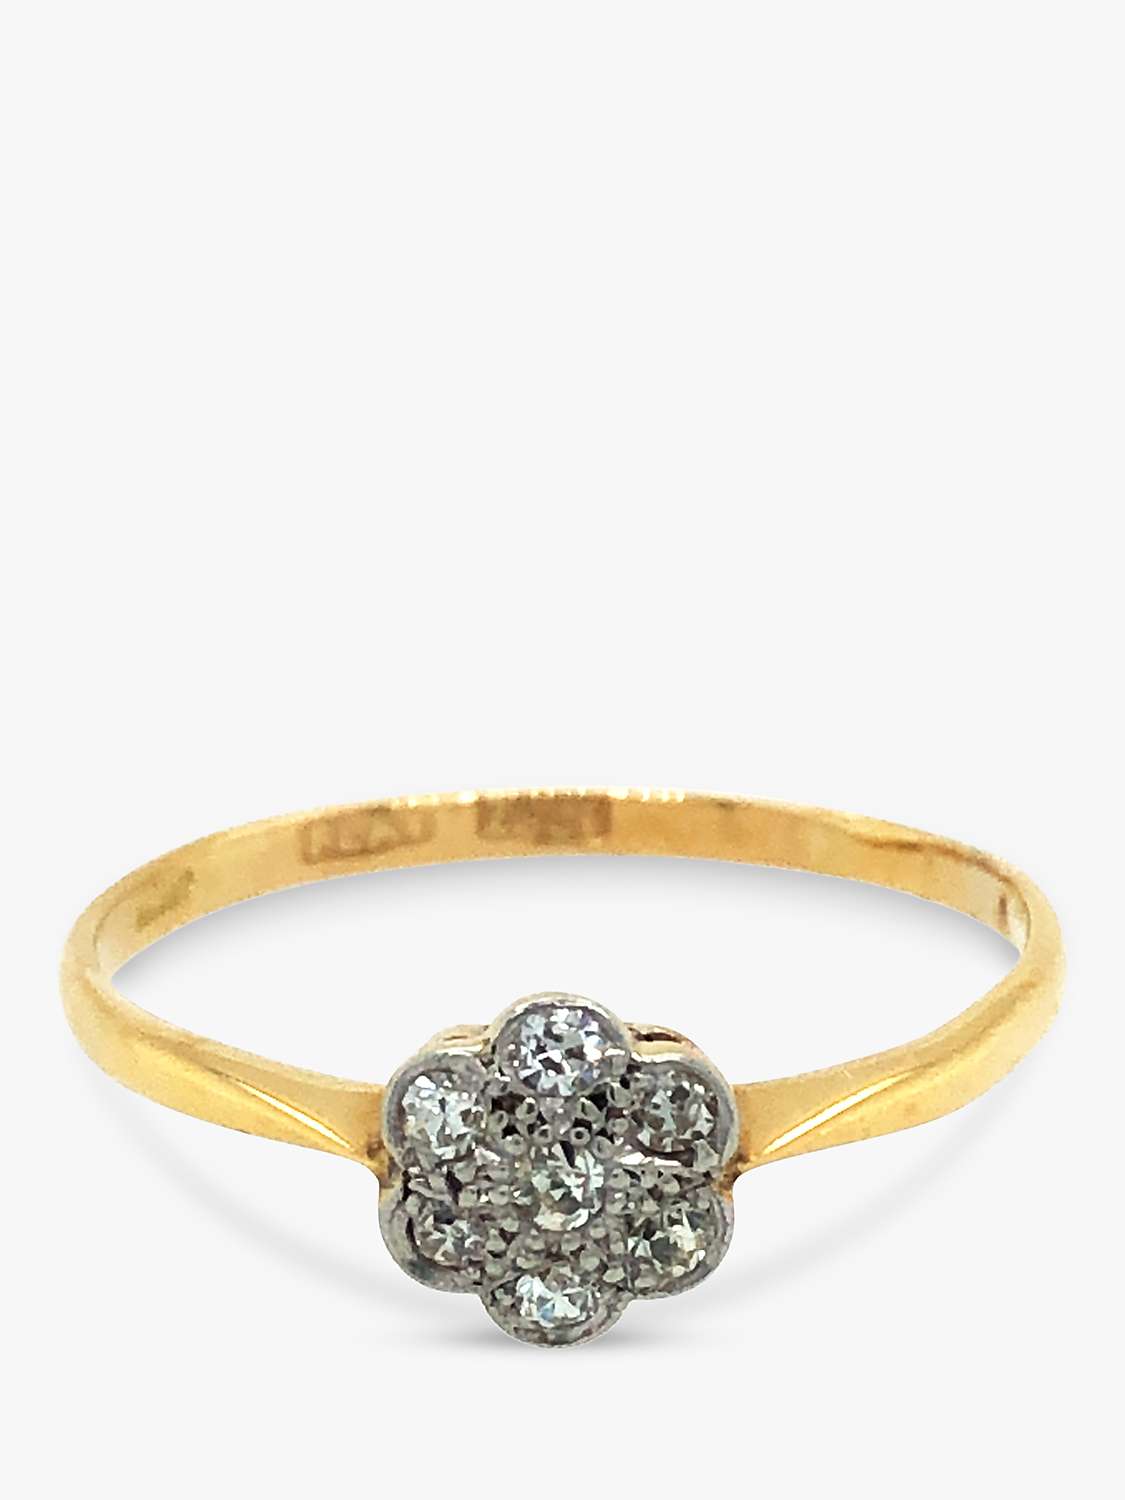 Buy VF Jewellery 18ct Yellow & White Gold 7 Stone Cluster Diamond Second Hand Ring Online at johnlewis.com